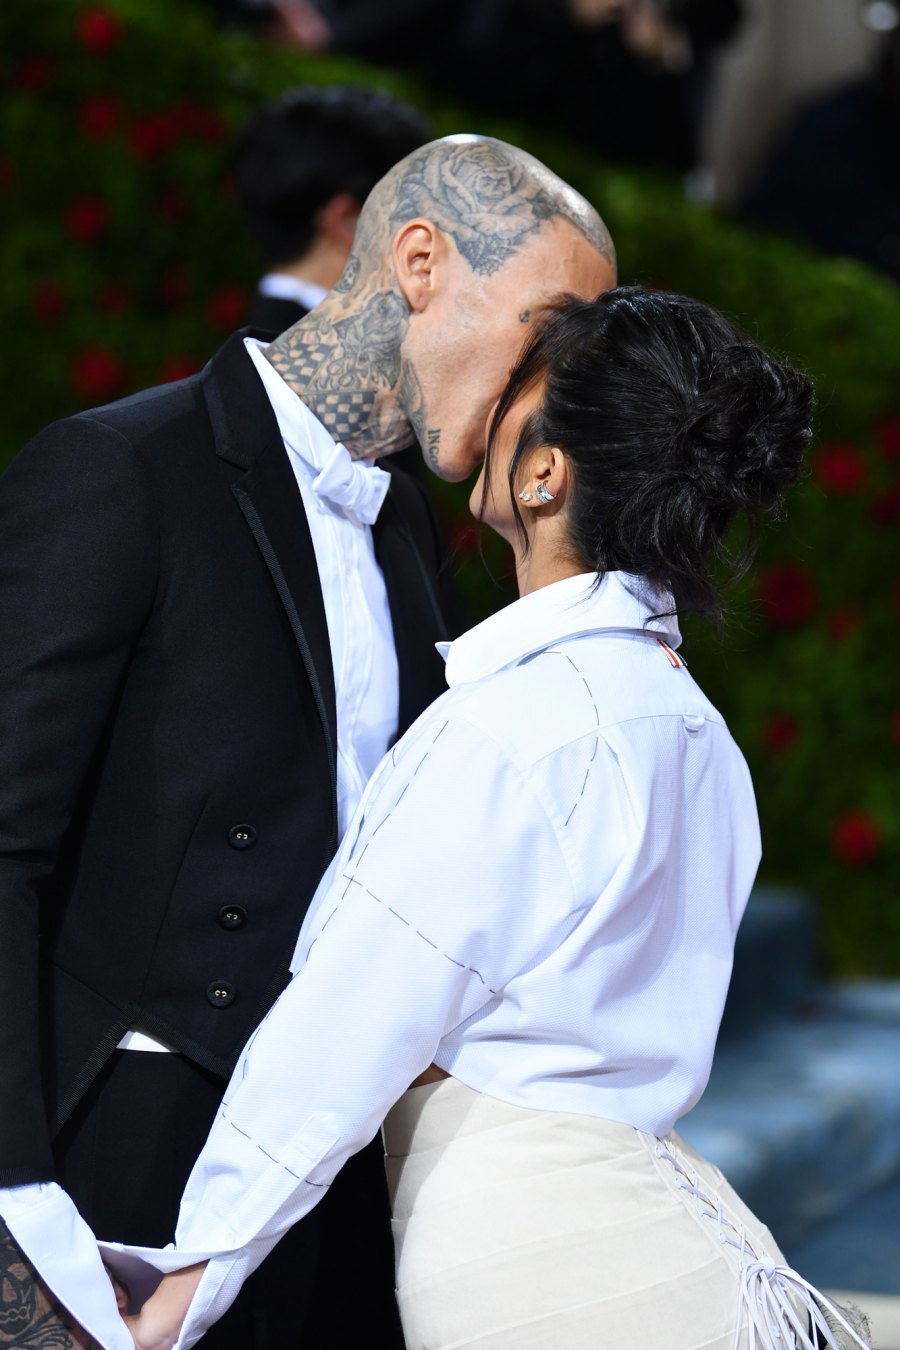 Kourtney Kardashian Breaks Down Why She and Travis Barker Had to Kiss With Their Tongues at the 2022 Met Gala: 'That Is How We Live Our Life'